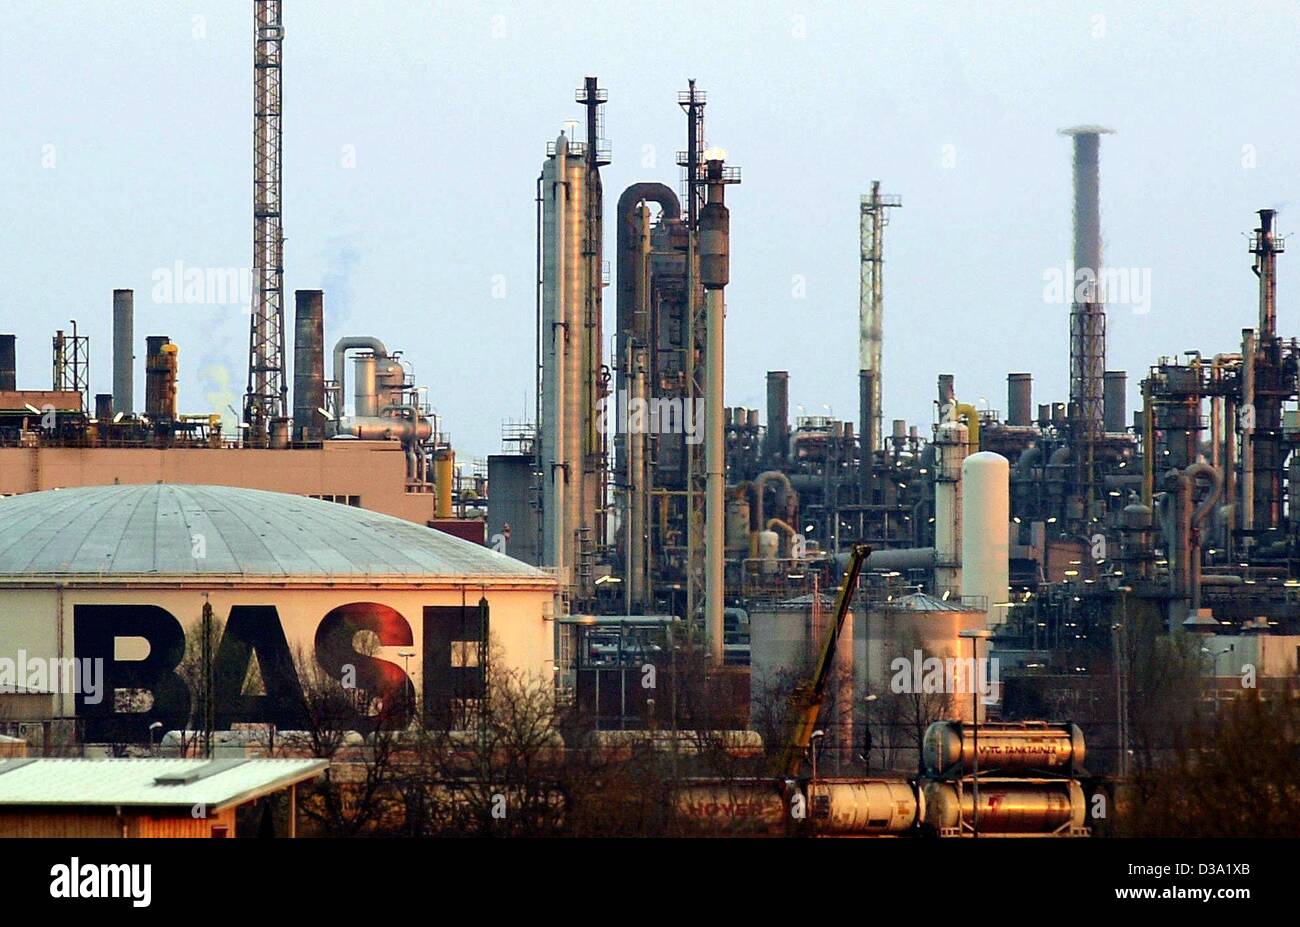 (dpa) - The plant of German chemical group BASF in Ludwigshafen, pictured on 13 March 2002.  The company's prognosis for 2002 is that it will be a 'difficult year'. Stock Photo